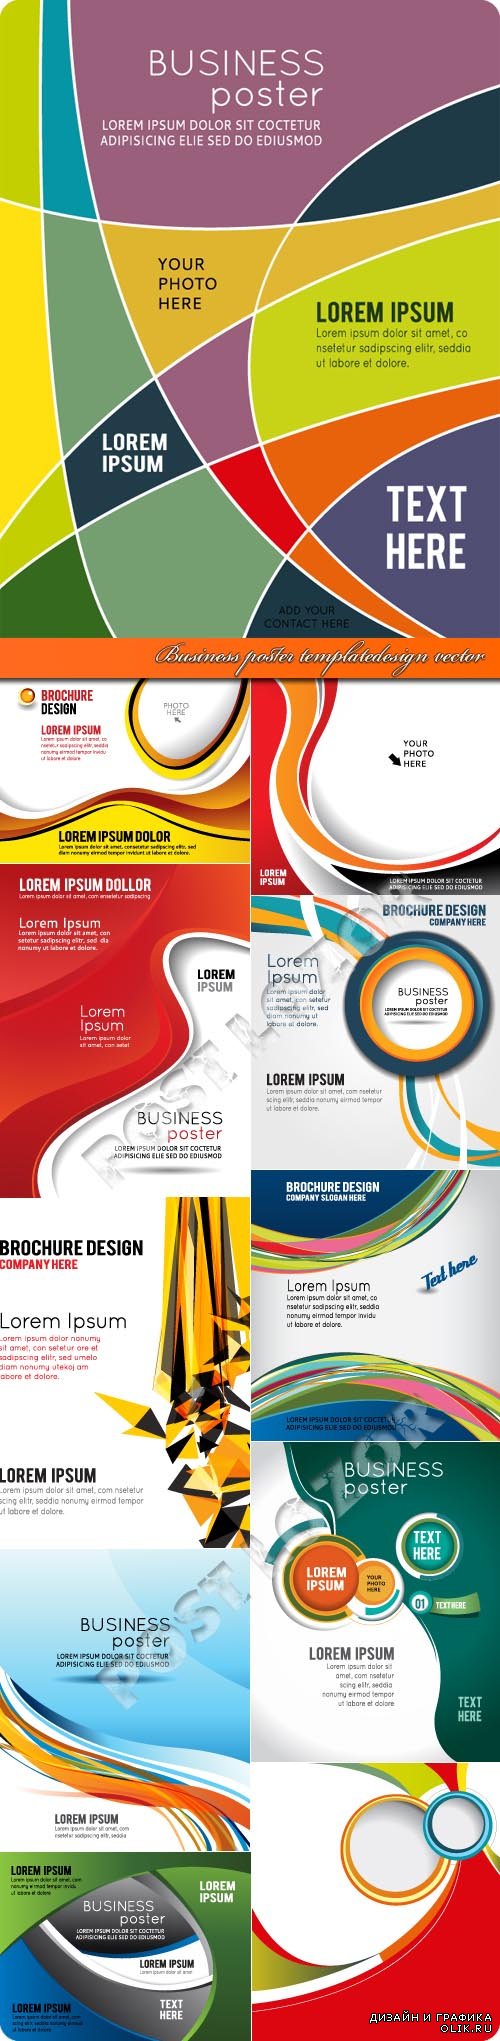 Business poster template design vector